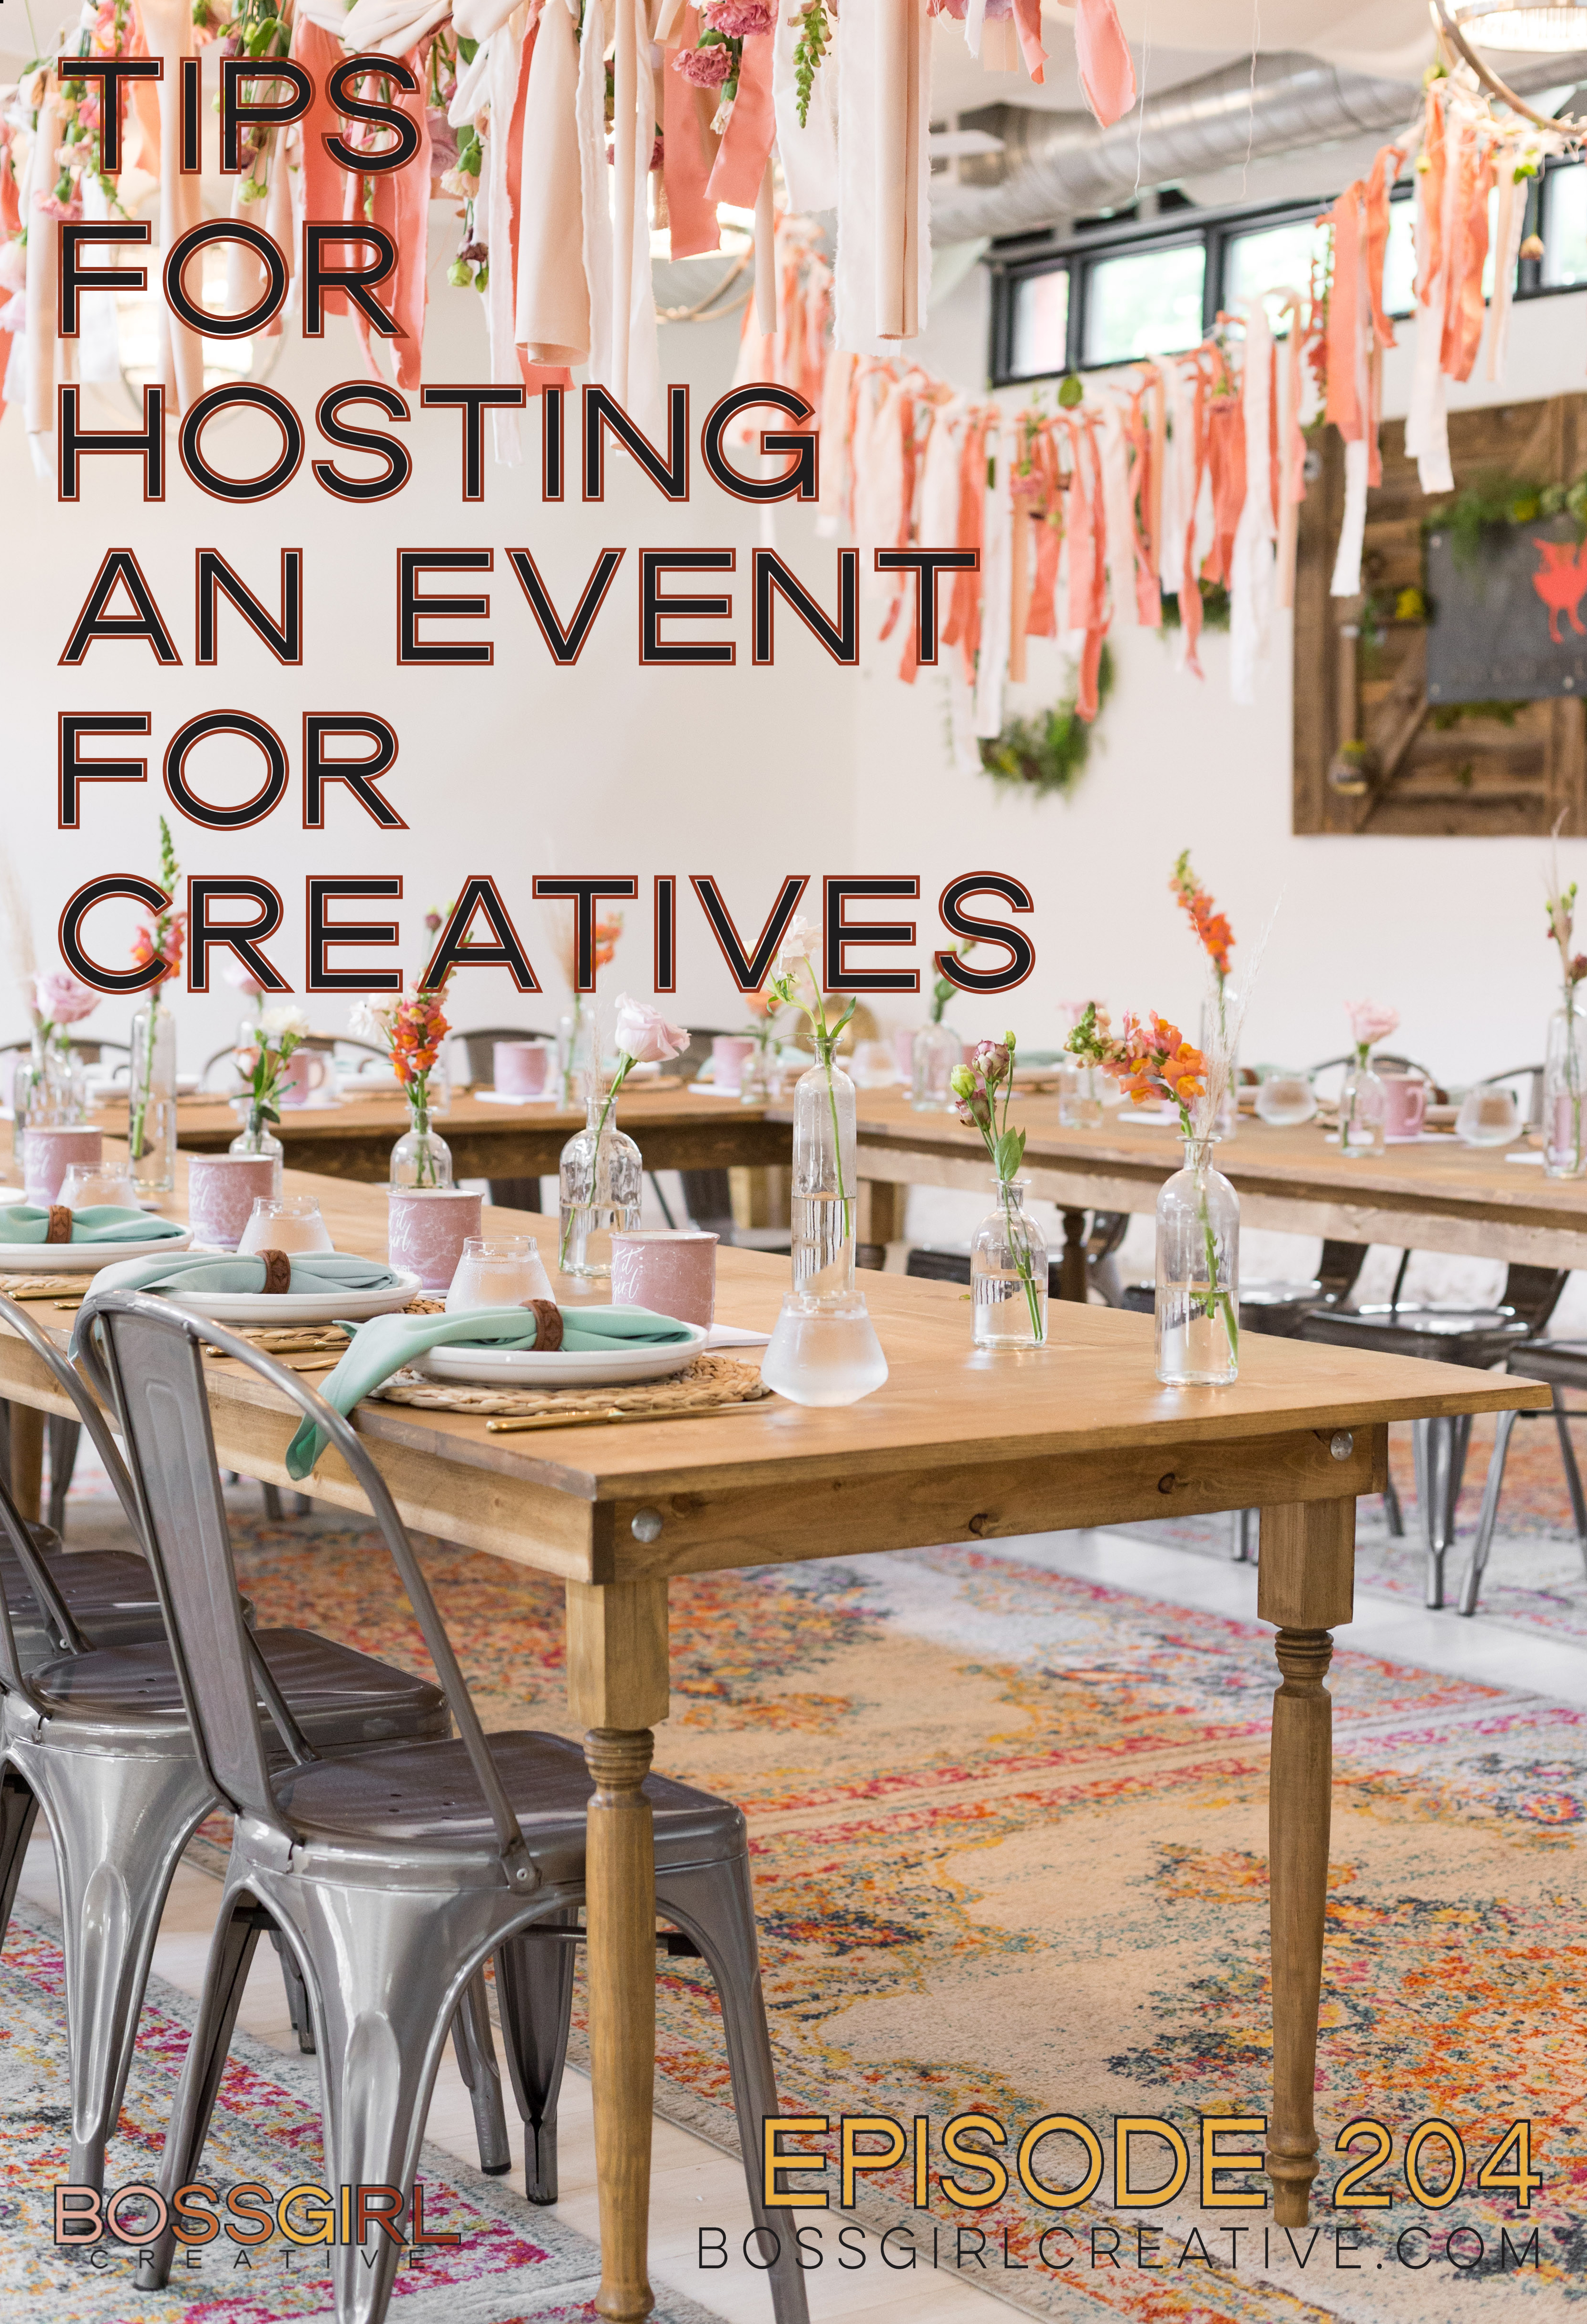 Looking to host an event for creatives? Take a listen to this episode to learn some tips on how to host a successful event for creatives based on my own experience!